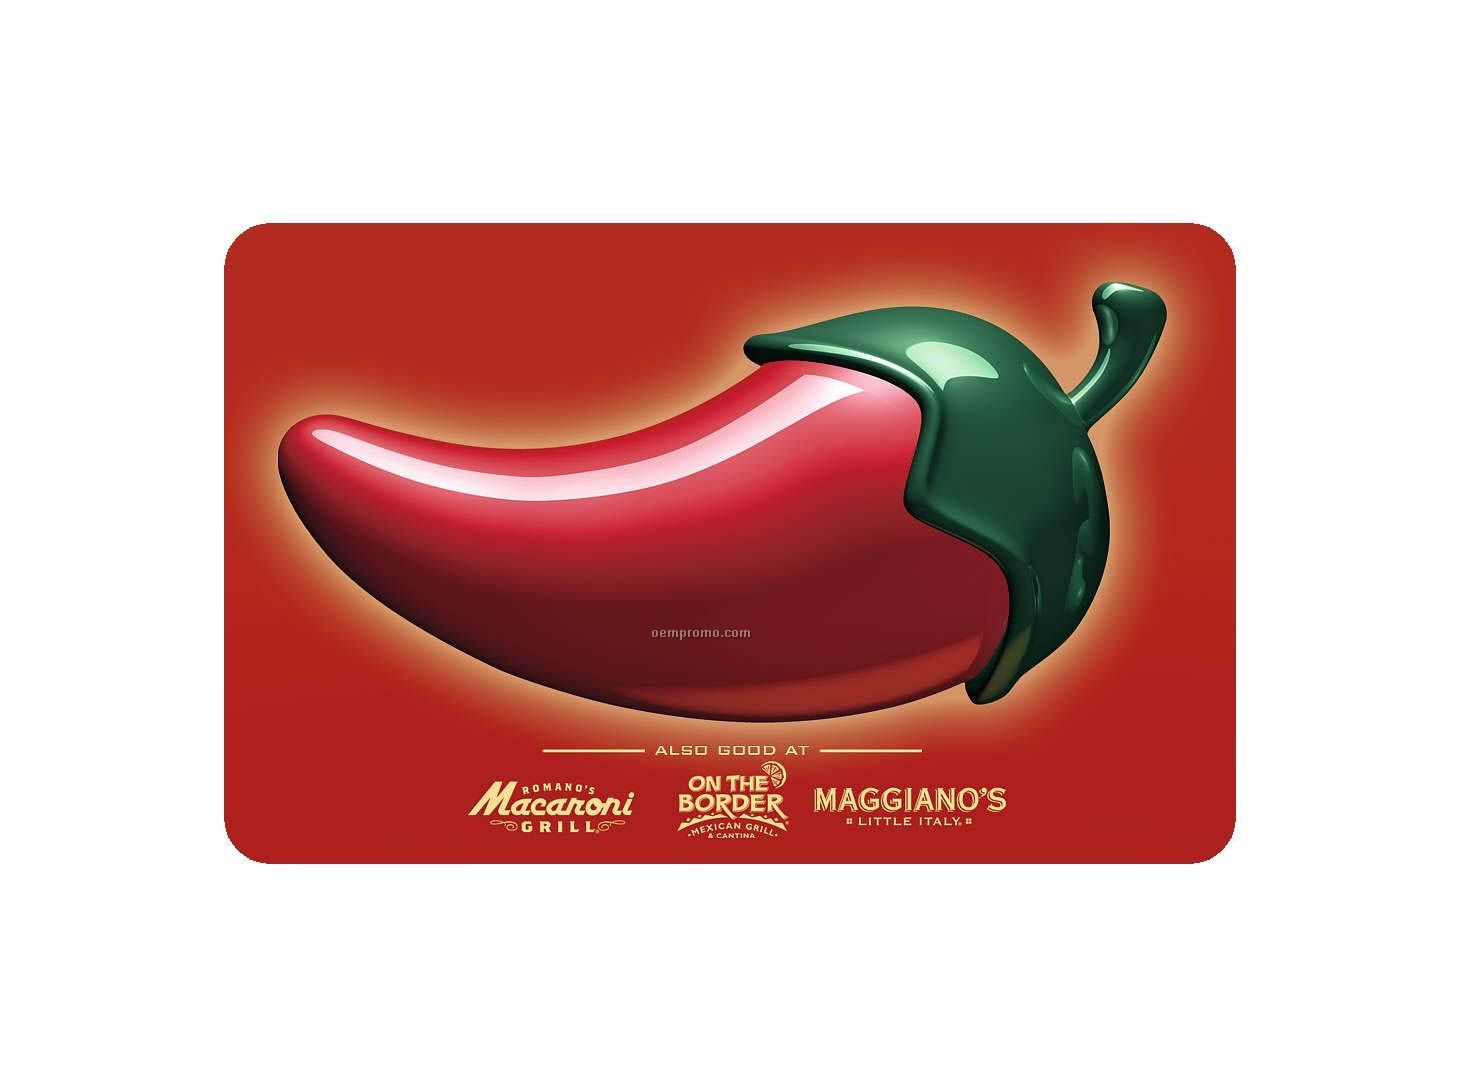 $50 Maggiano's Gift Card